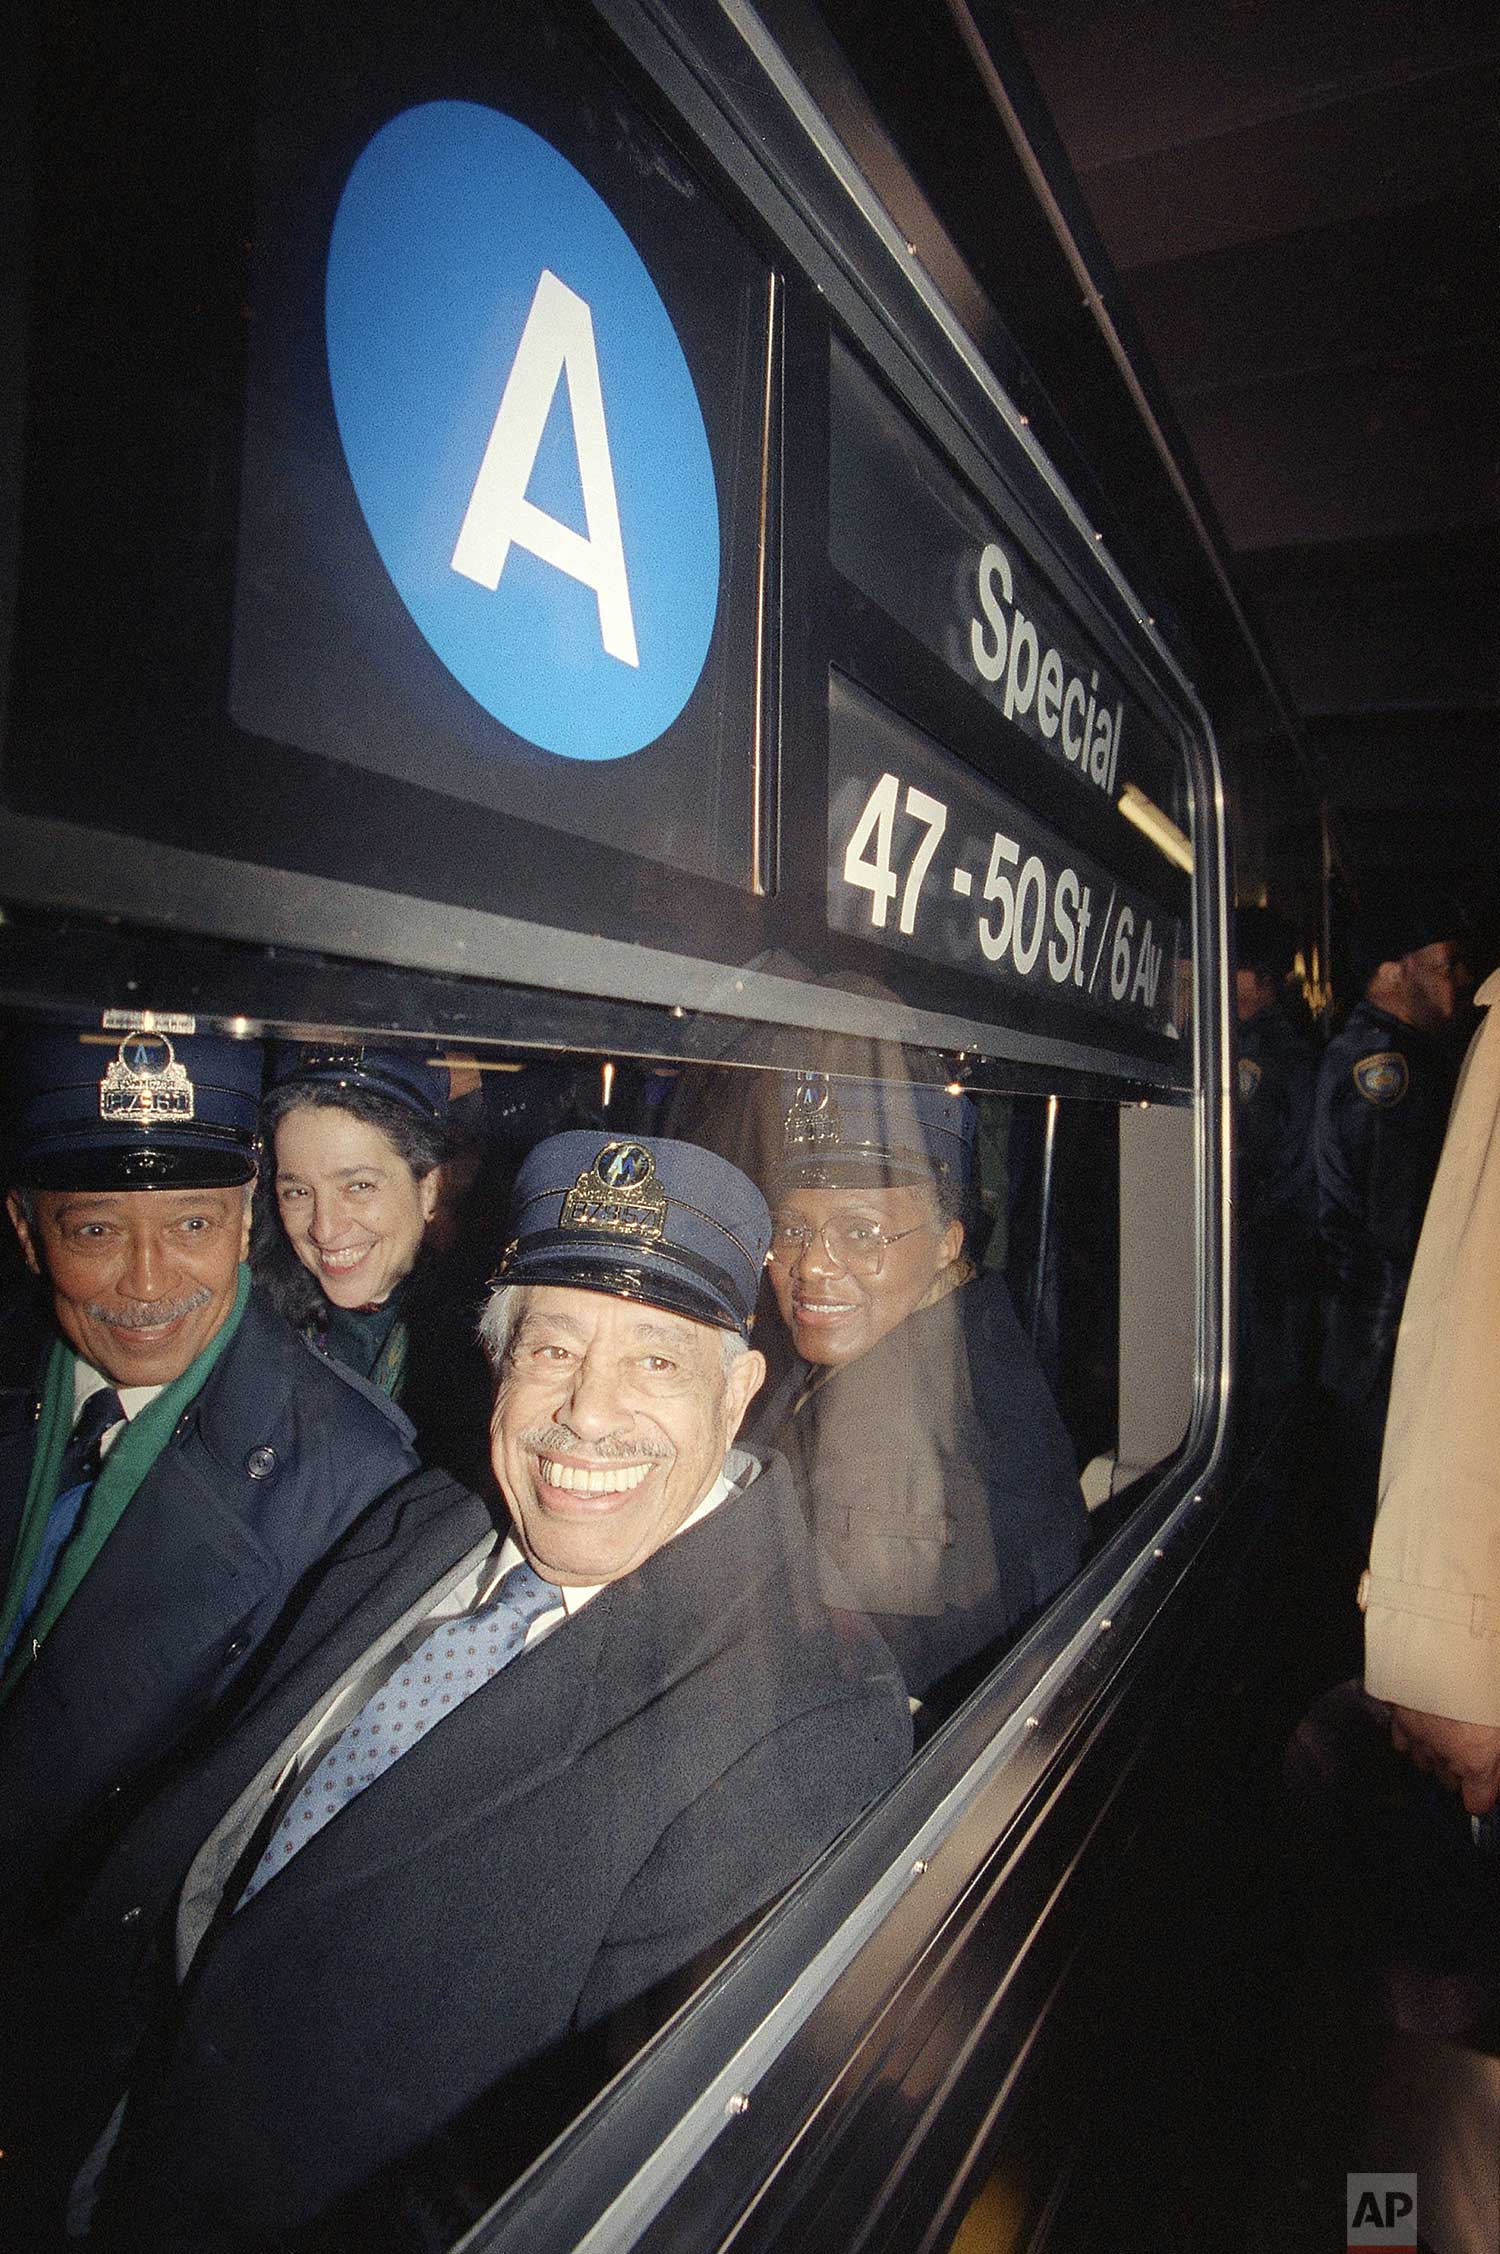  Mayor David Dinkins, left, and entertainer Cab Calloway, right, take a ride on the A train from Harlem to Radio City Music Hall to officially kick off Grammy Week in New York on Feb. 18, 1991. Seated behind is Manhattan borough president Ruth Messin